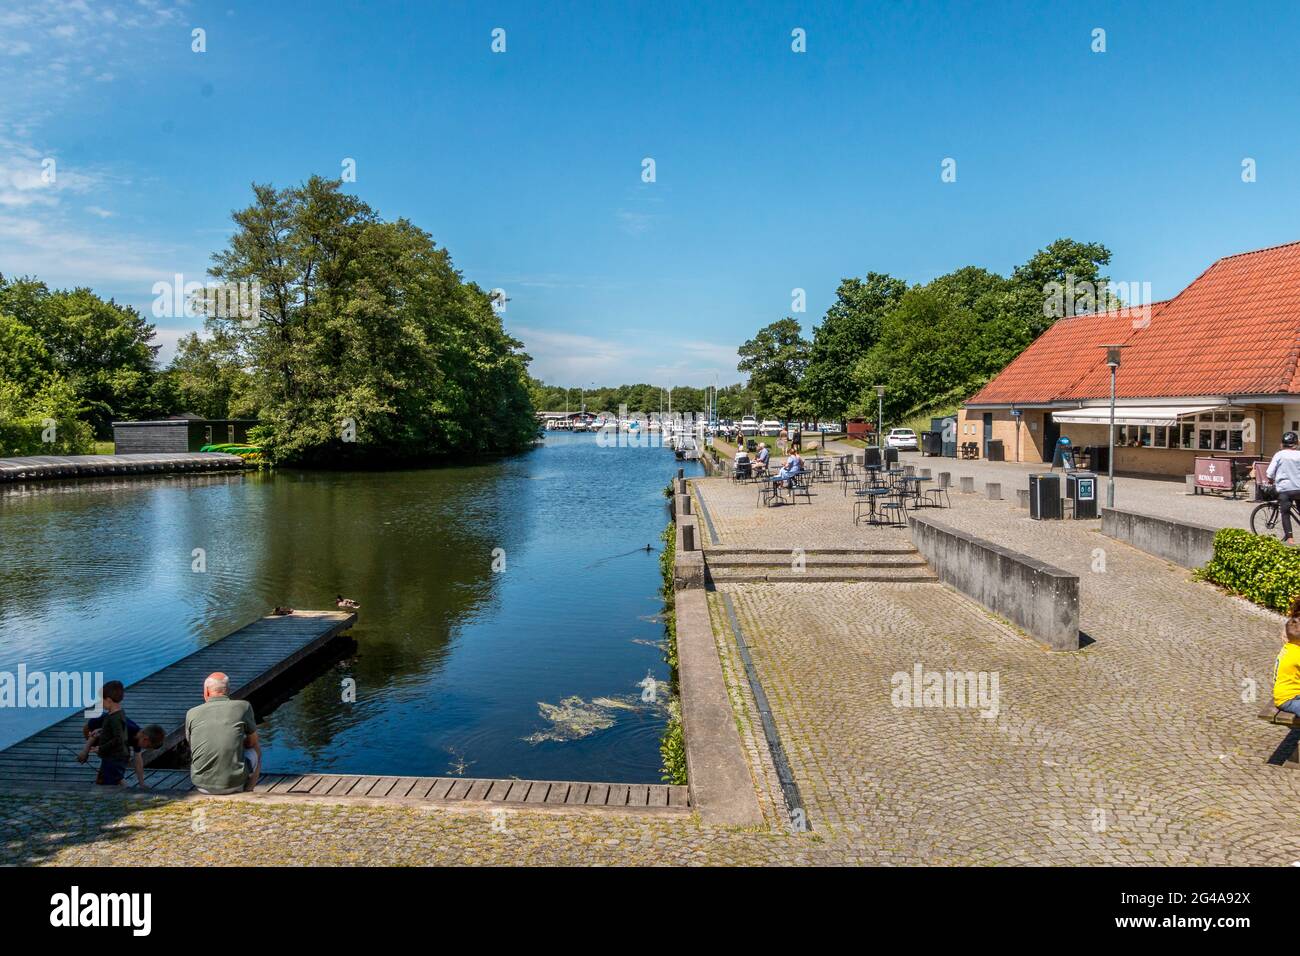 Ry, Denmark - June 16 2021: Ry Marina by Silkeborg, Beautiful marina with both in the background and people enjoying themselves on a nice summer day. Stock Photo